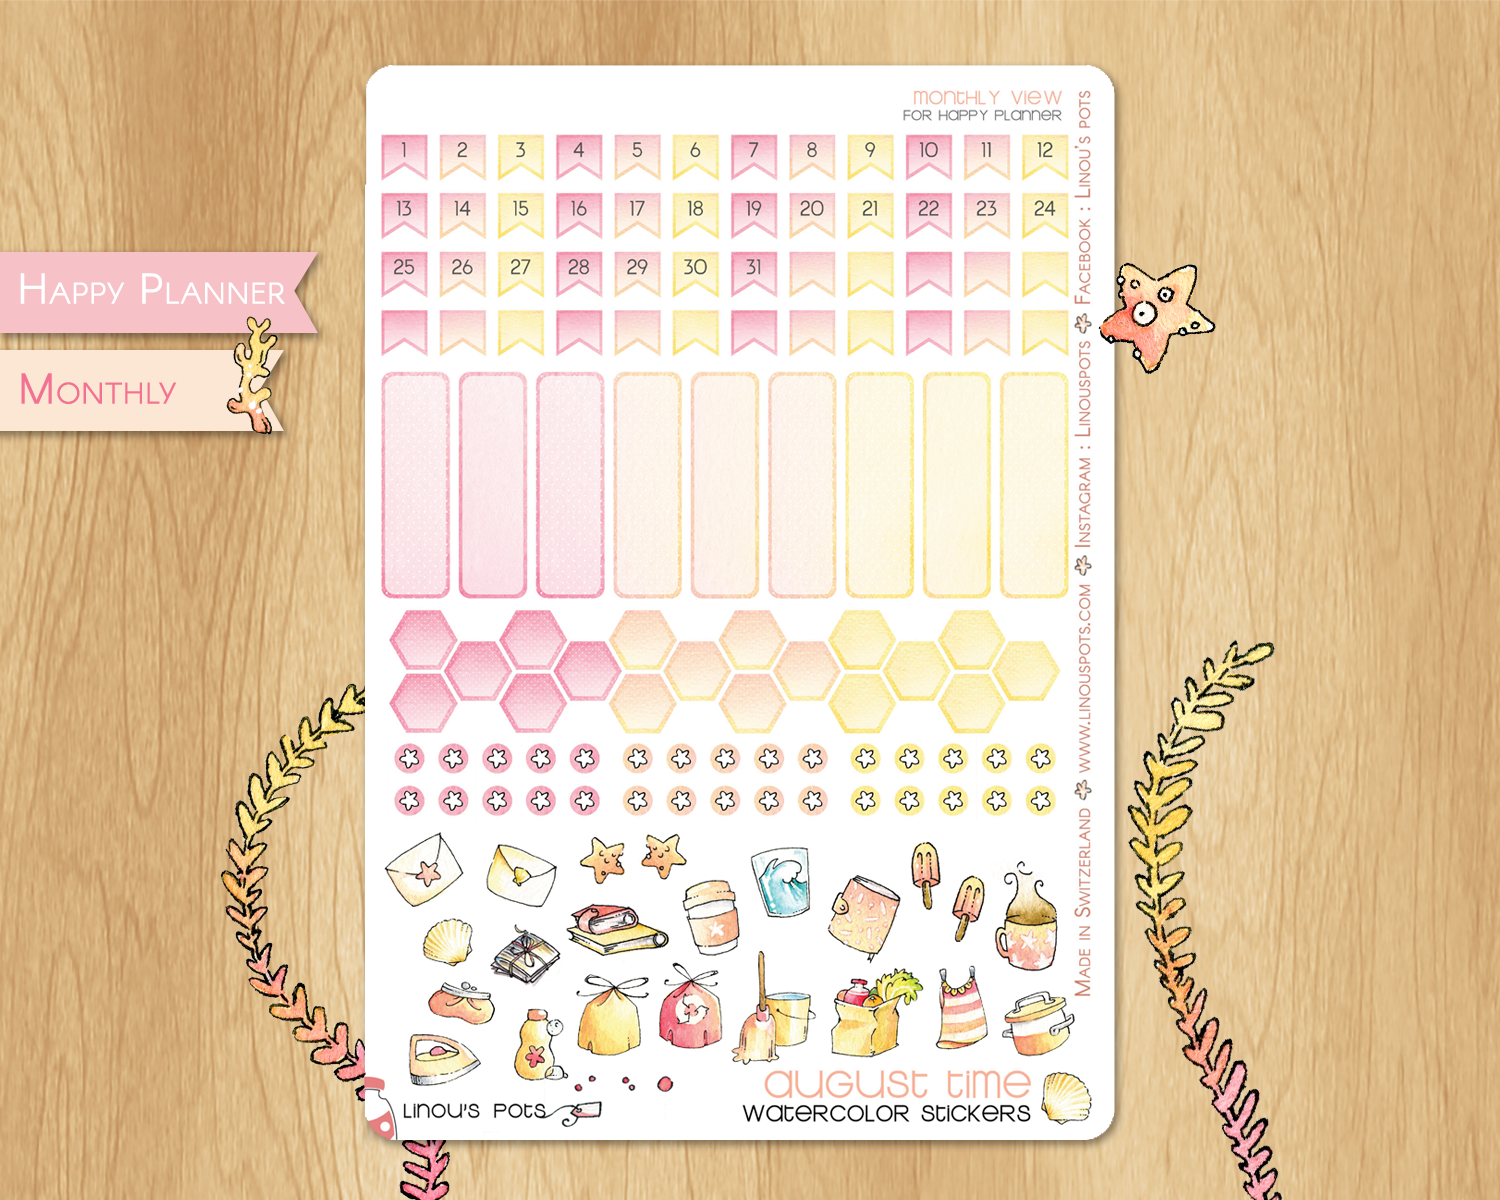 Monthly dates watercolor stickers for Summer - Happy Planner version